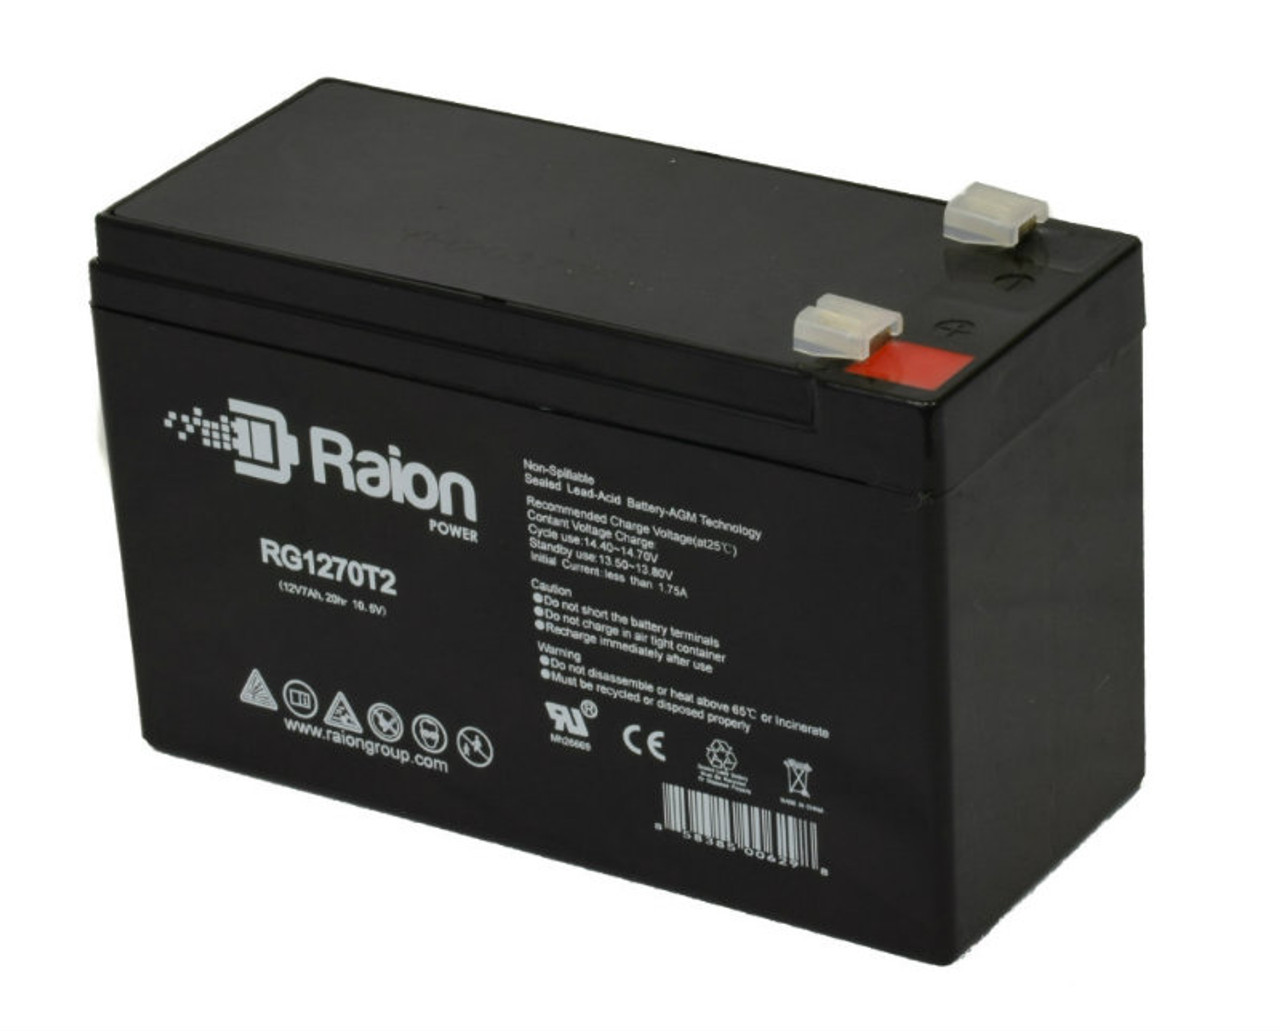 Raion Power RG1270T1 12V 7Ah Non-Spillable Replacement Battery for Exell EB1270F1